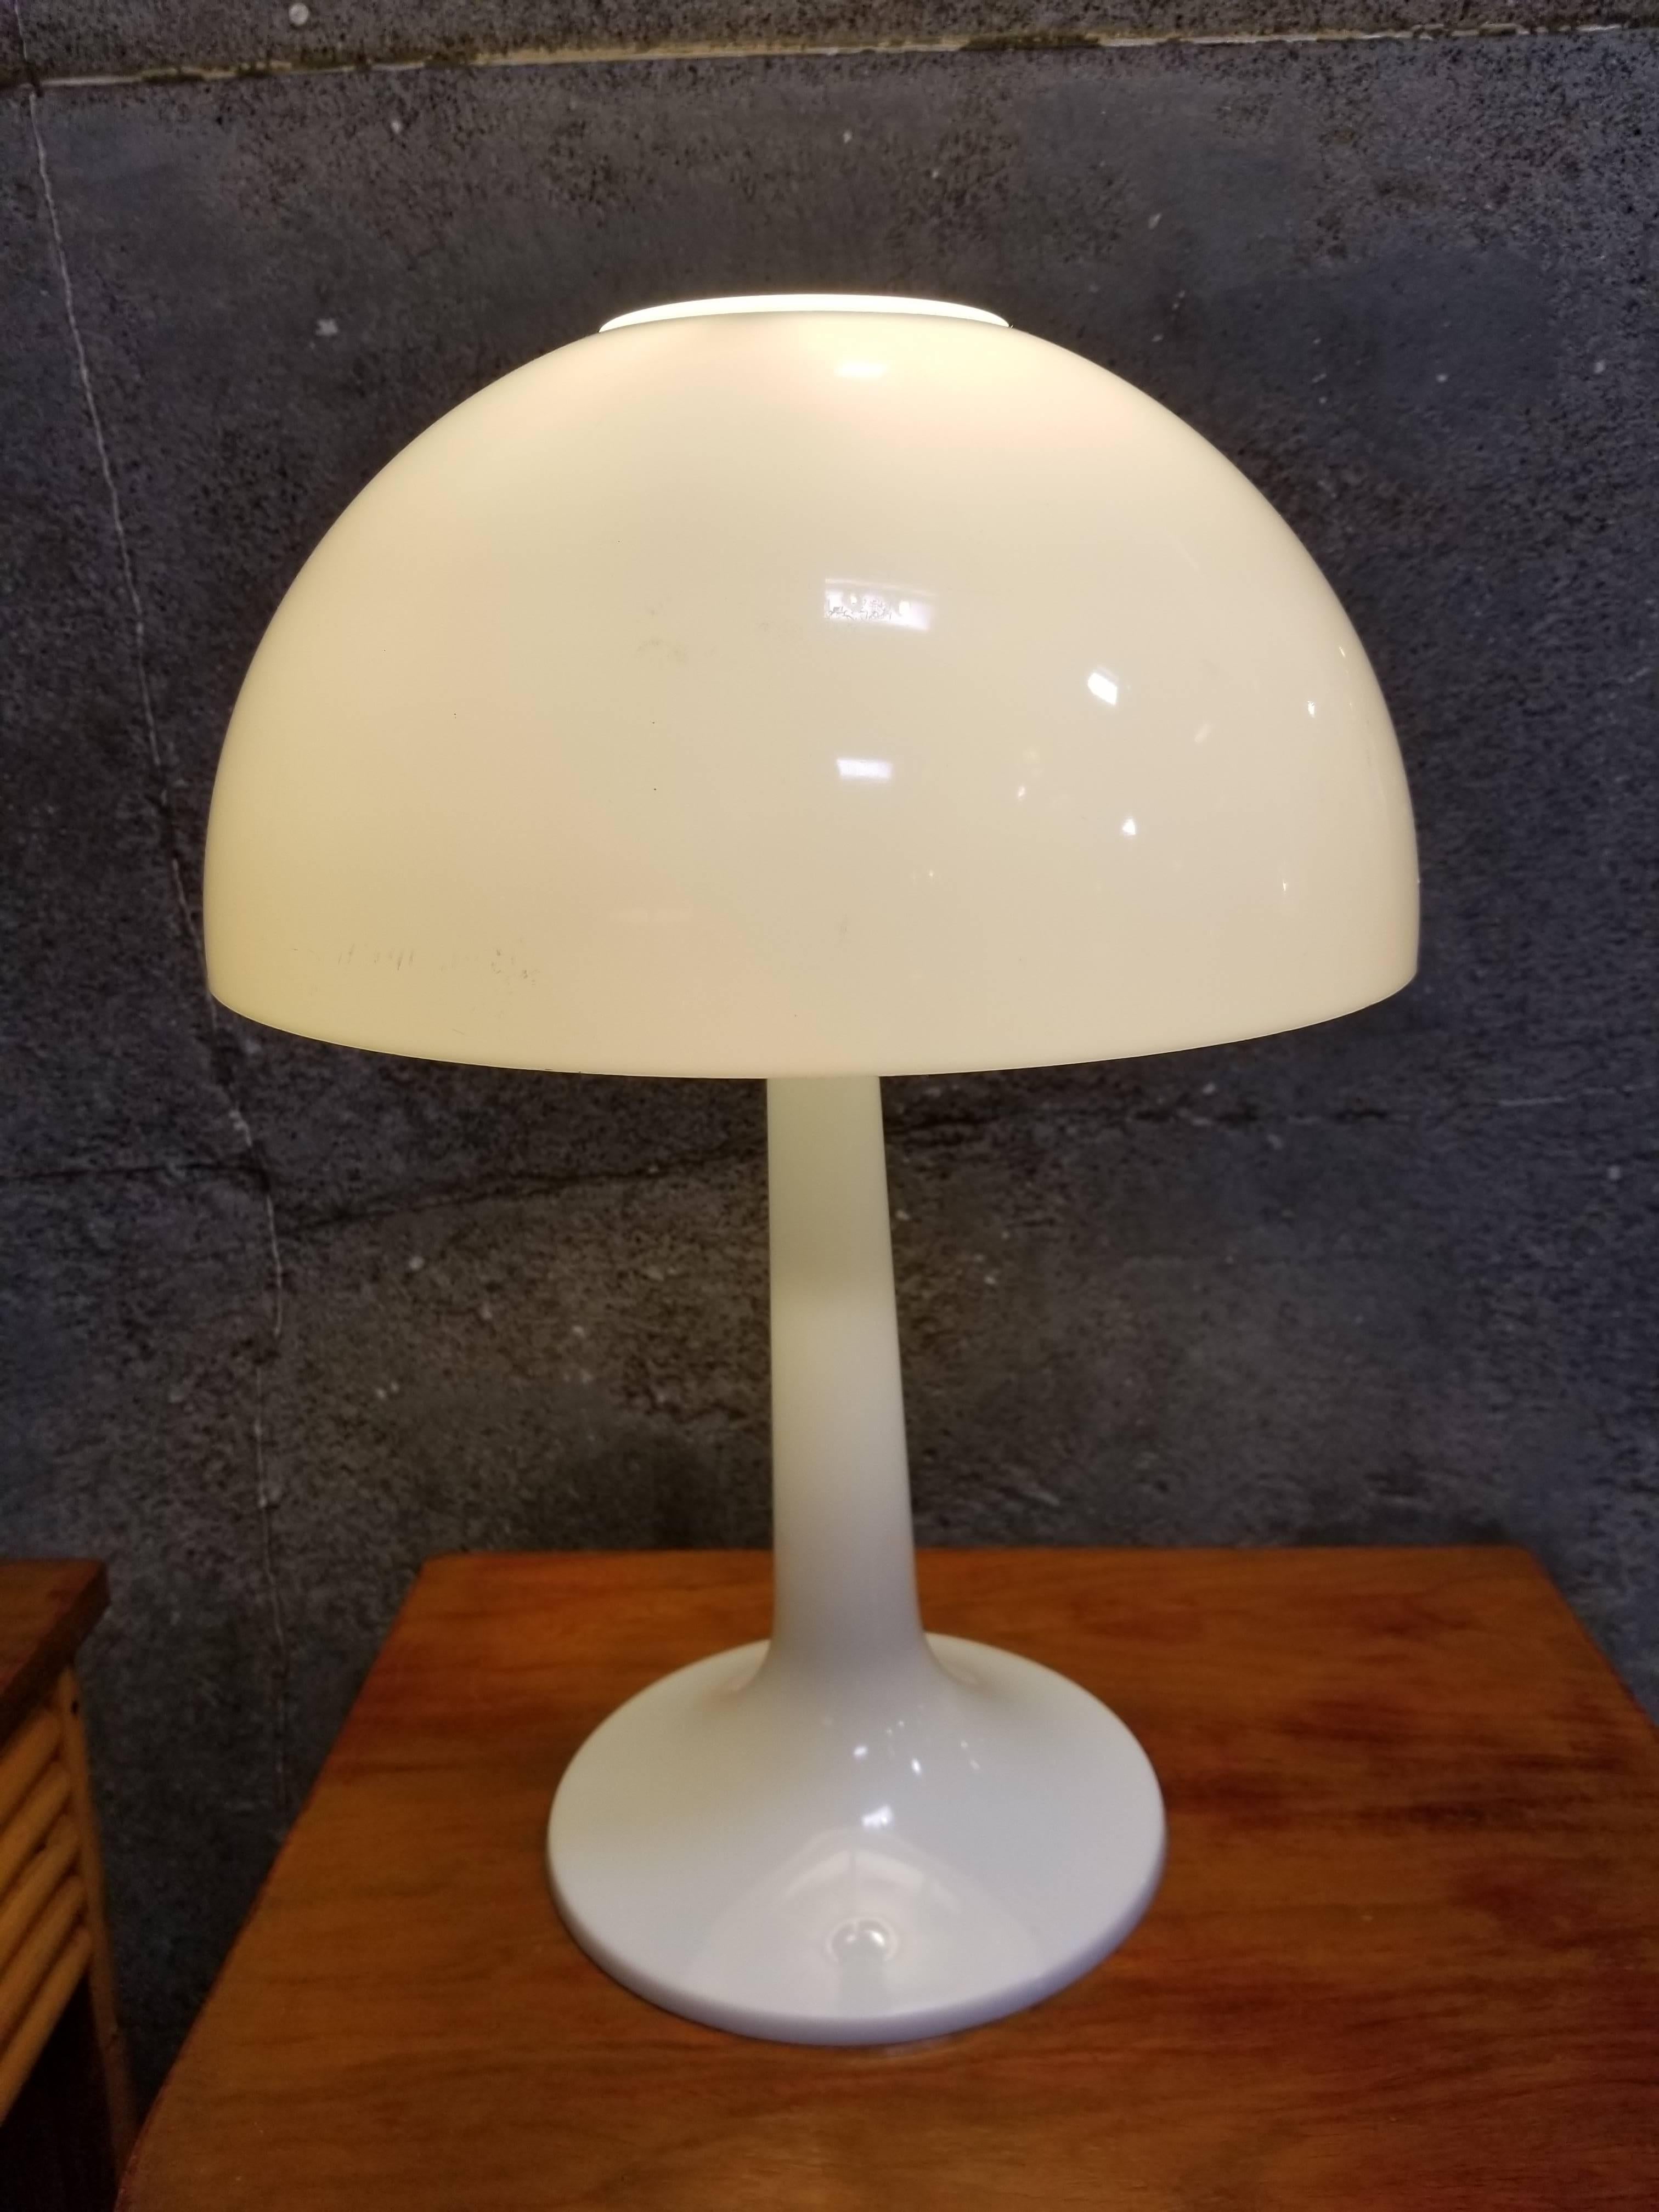 1970s white plastic table lamp with tulip style base. Base diameter 7.25